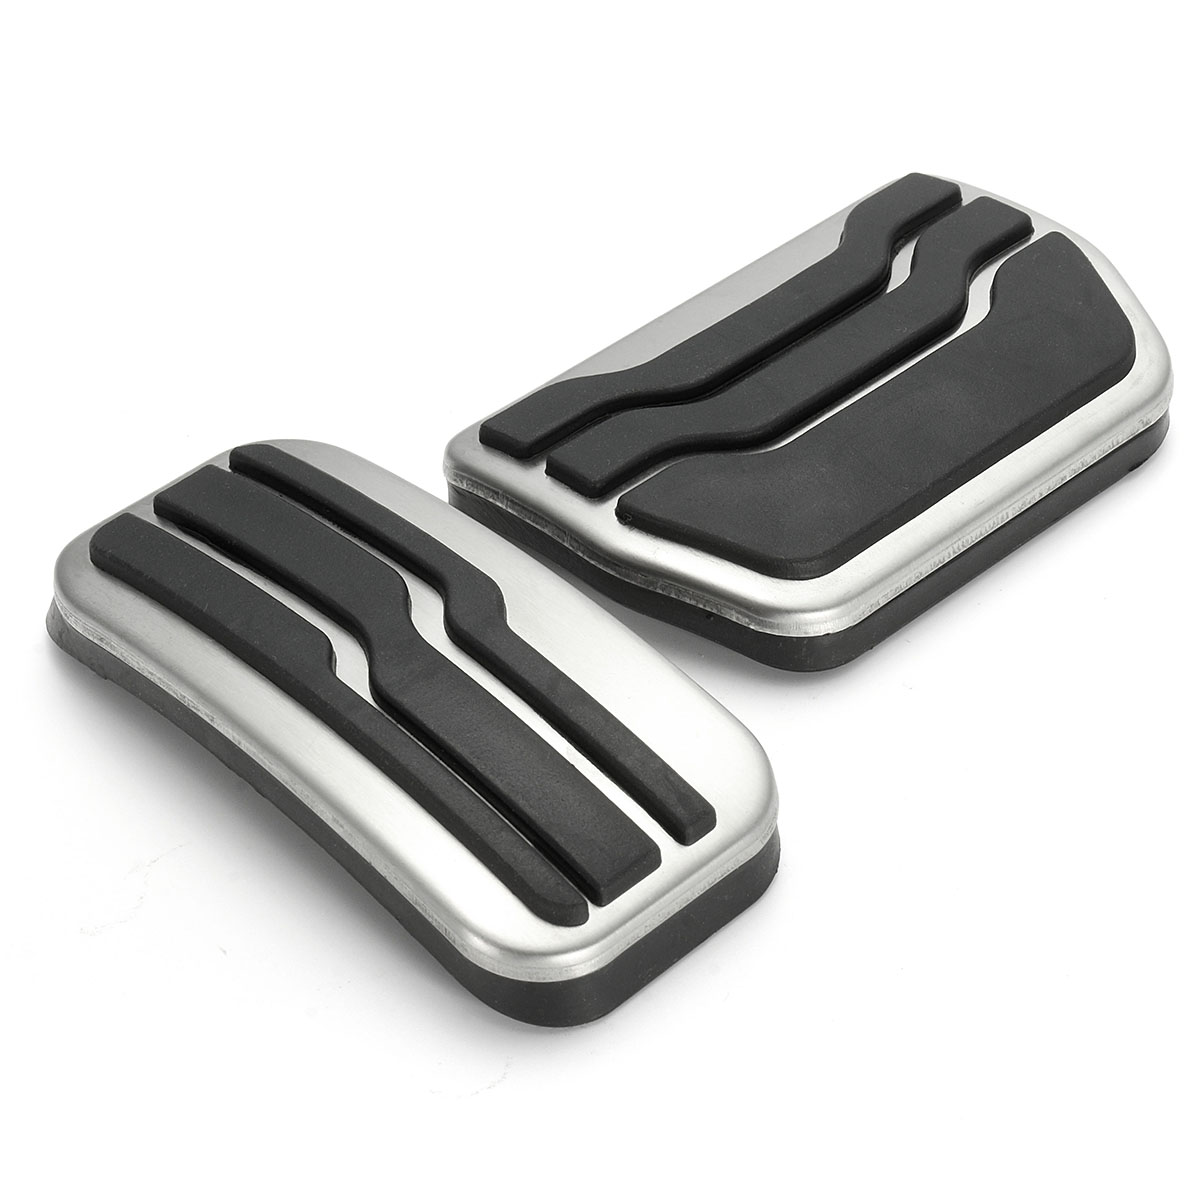 Racing Foot Footrest Fuel Gas & Brake Pedals Plate Cover For Ford Edge 2015